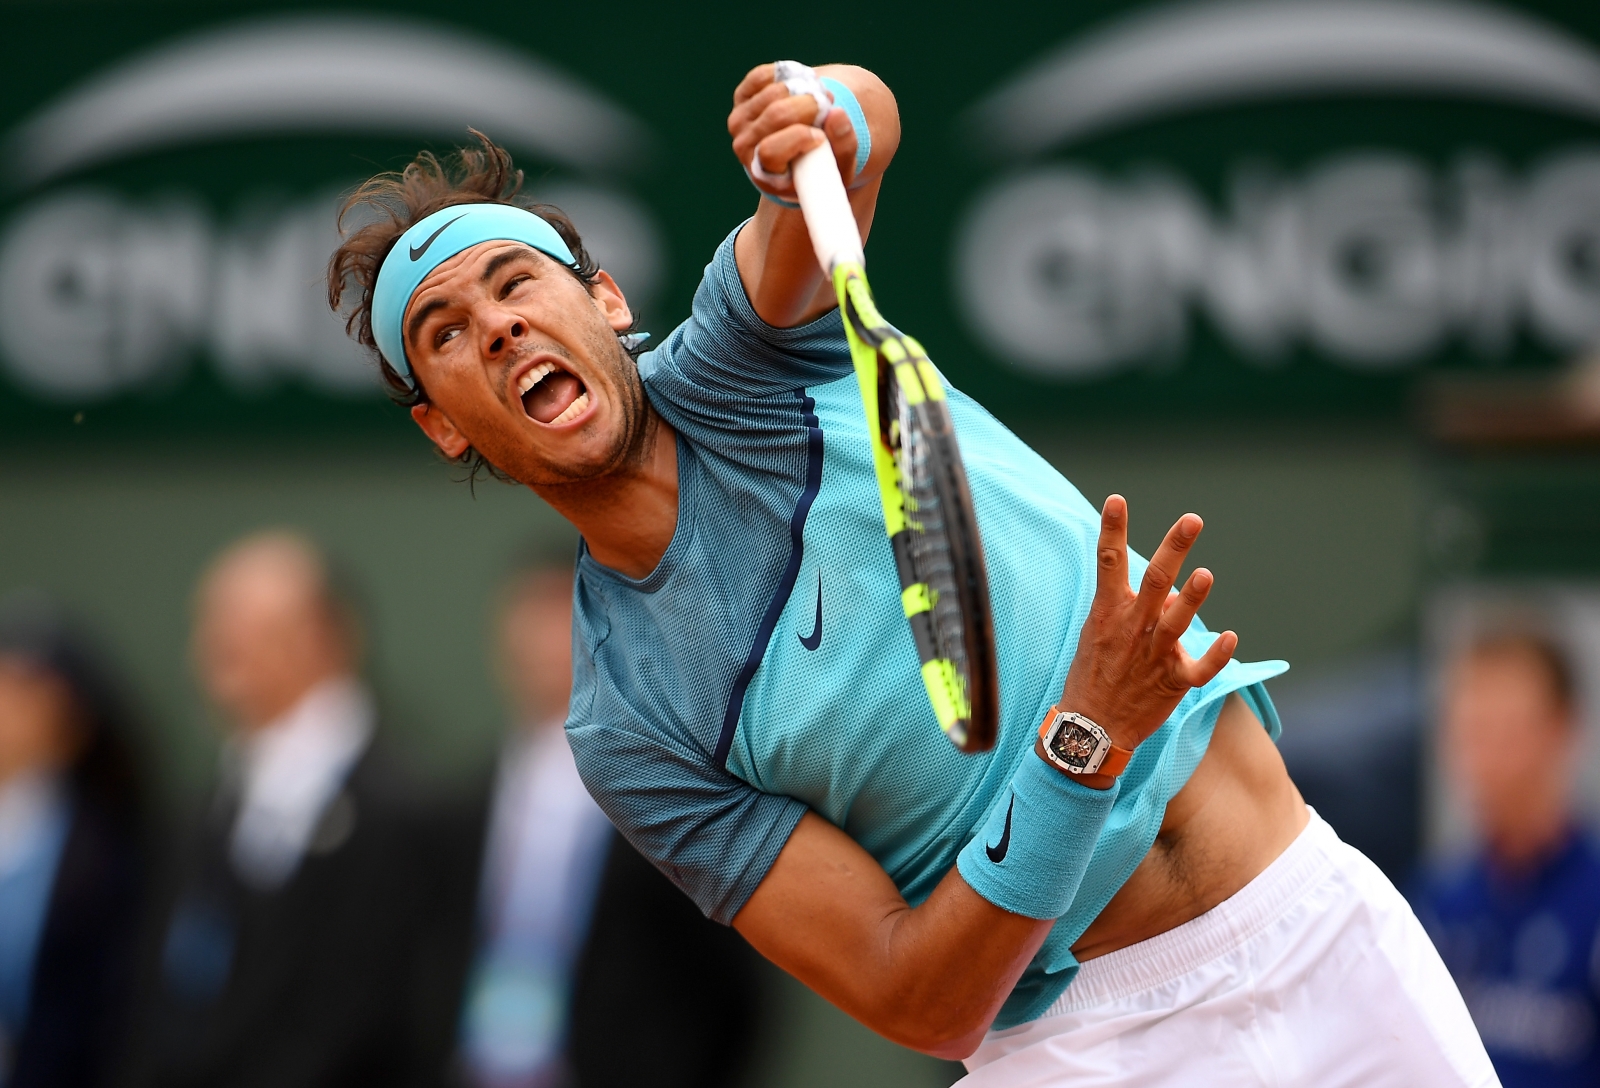 Rafael Nadal vs Andrey Kuznetsov, US Open 2016: Watch live, preview and betting odds1600 x 1088